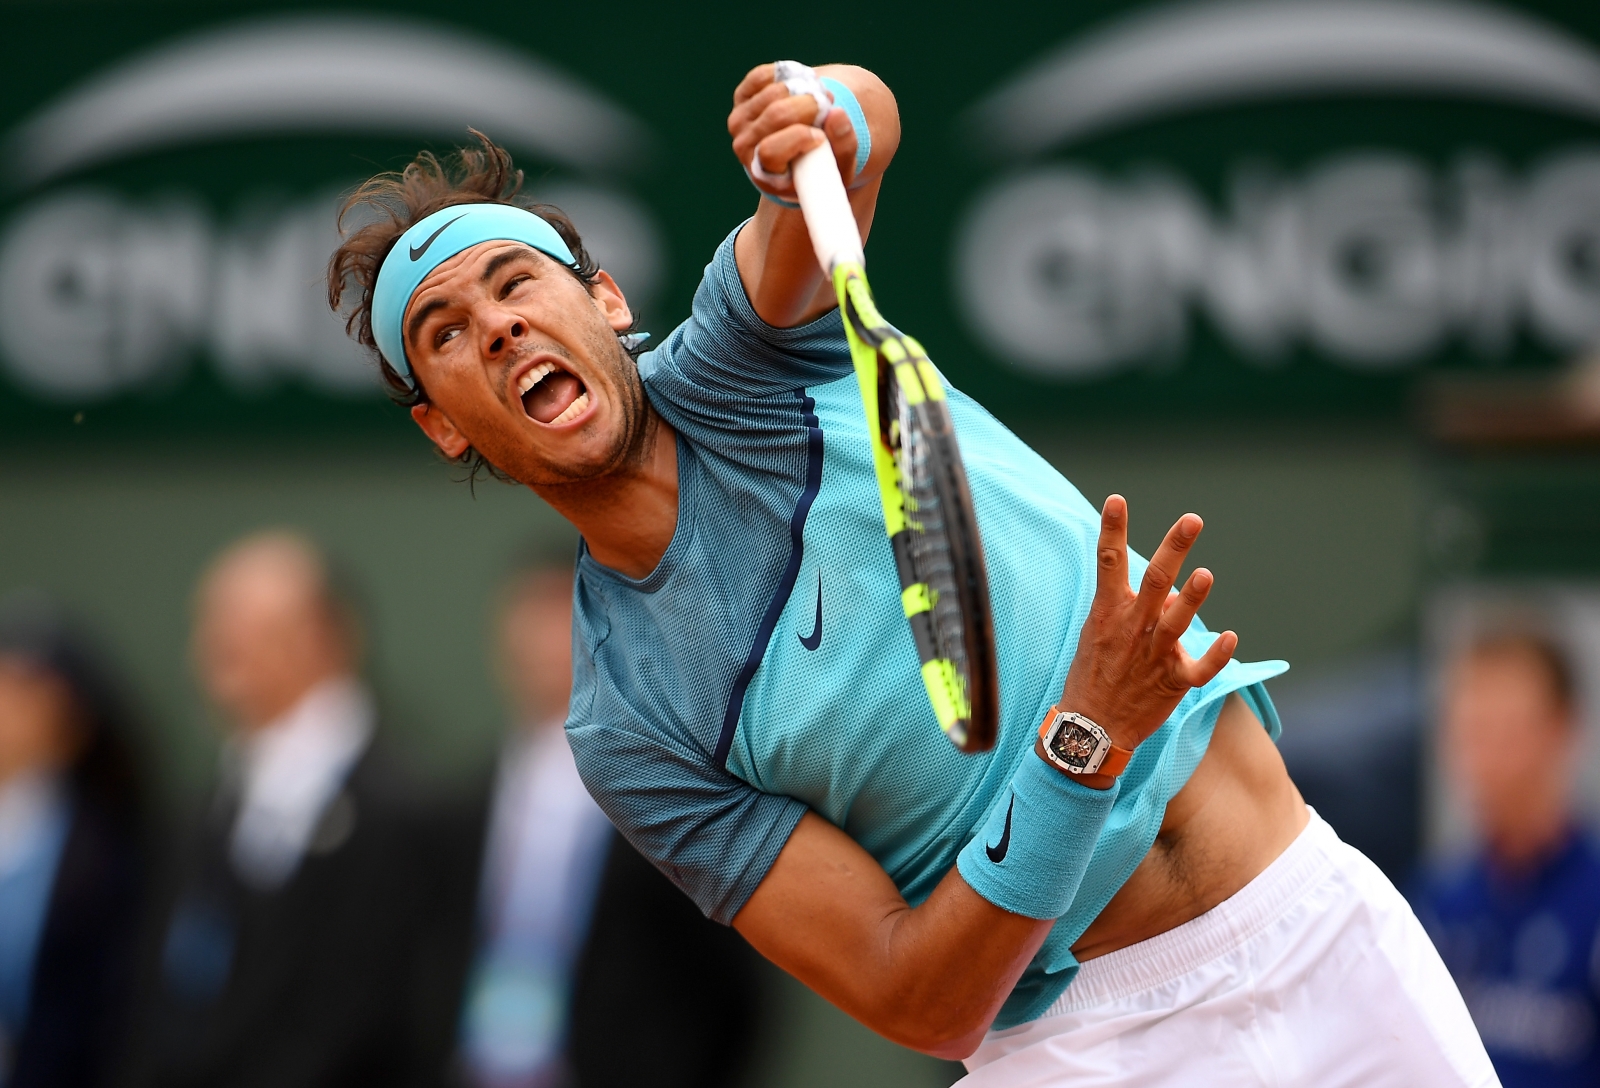 Rafael Nadal vs Andrey Kuznetsov, US Open 2016: Watch live, preview and betting odds1600 x 1088